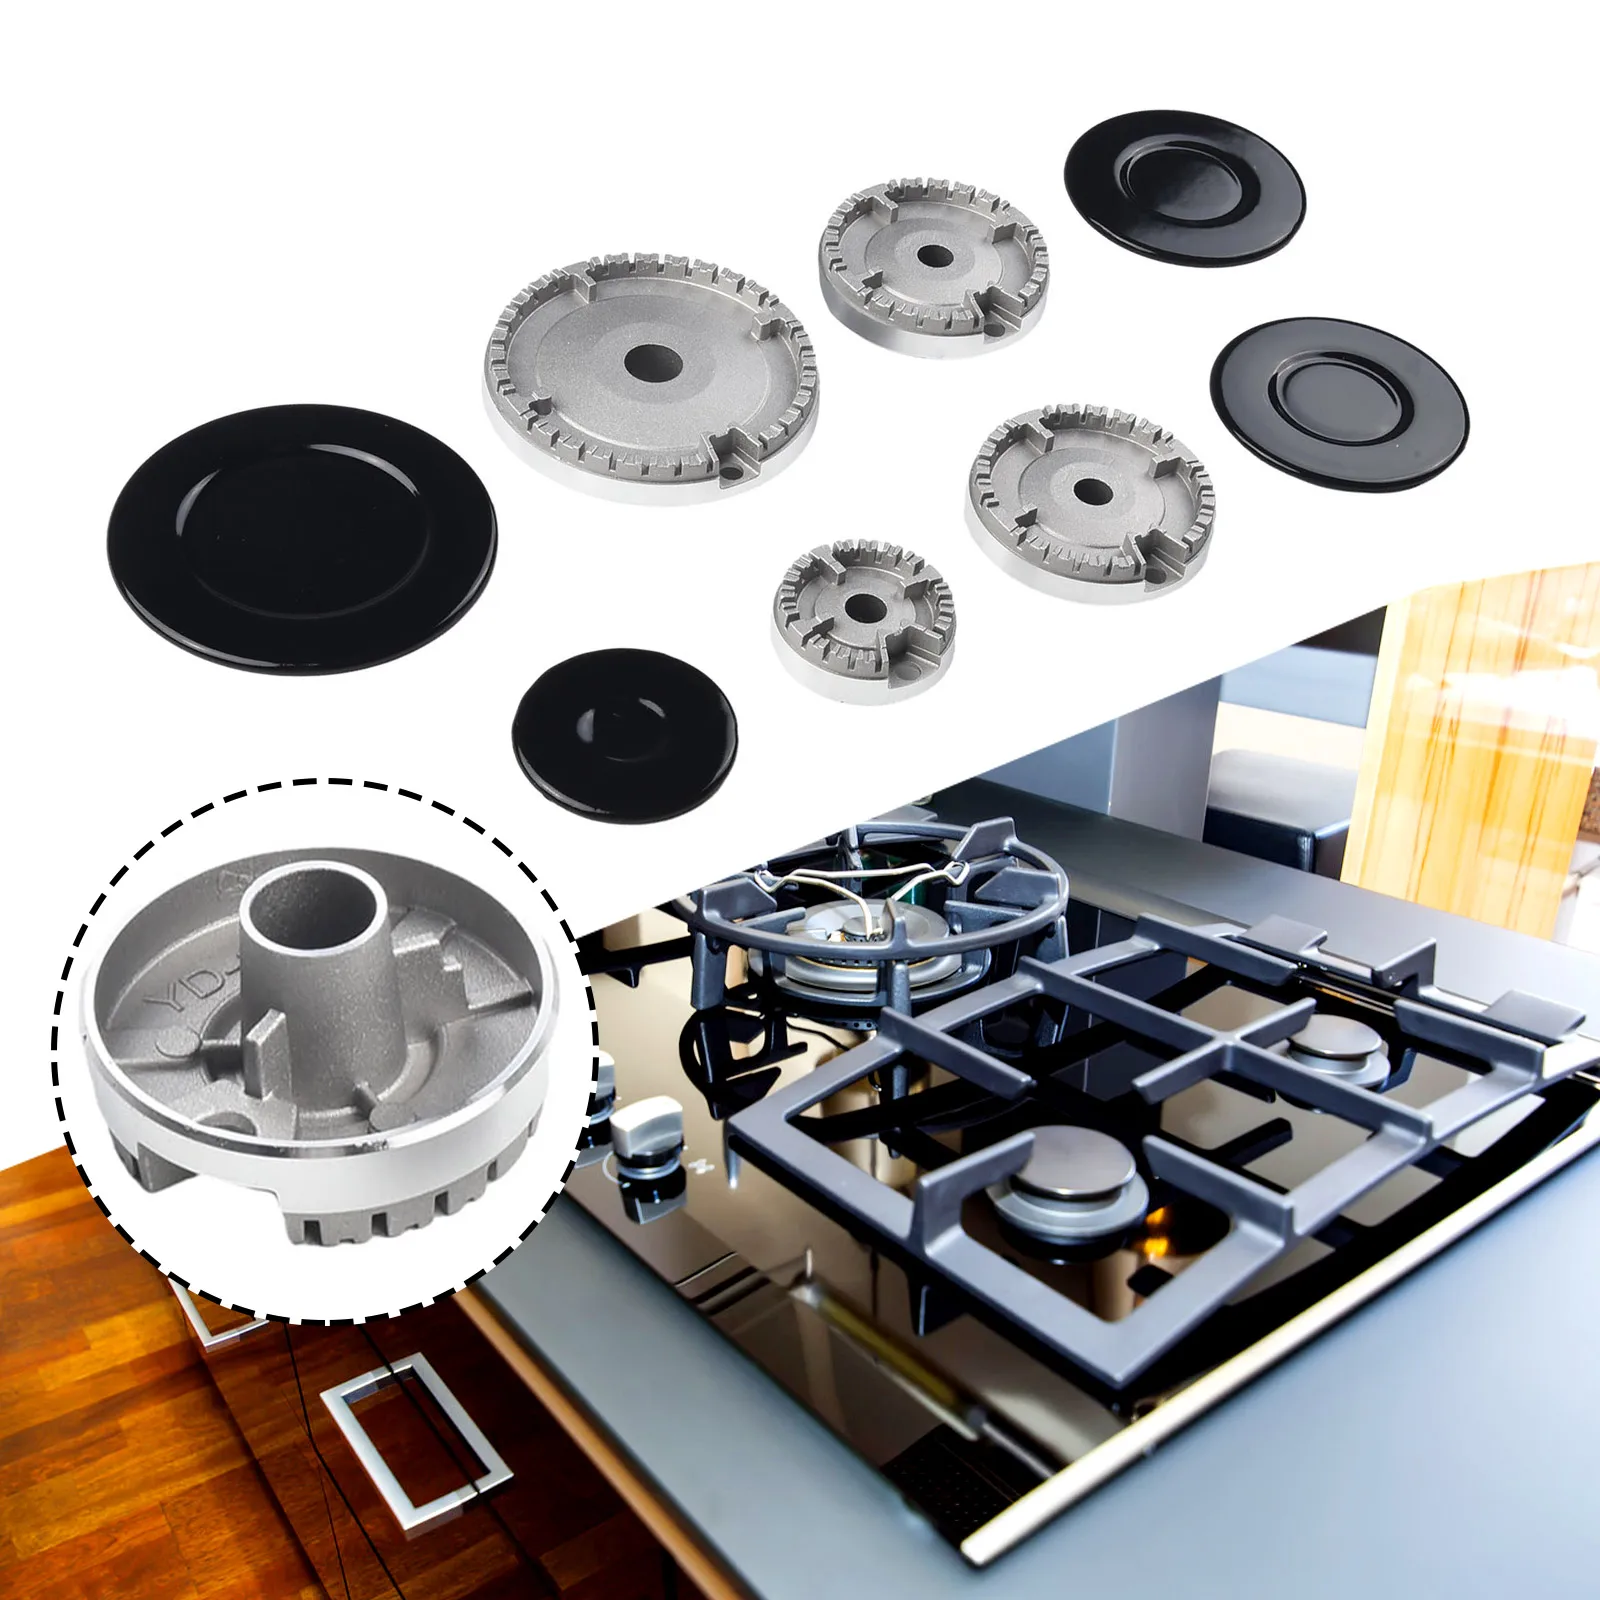 

1Set Cookware Hat Set Stove Lid Upgraded Gas Burner Fits Most Gas Stove Burners Stove Cookware Parts Kitchen,Dining Bar Tools